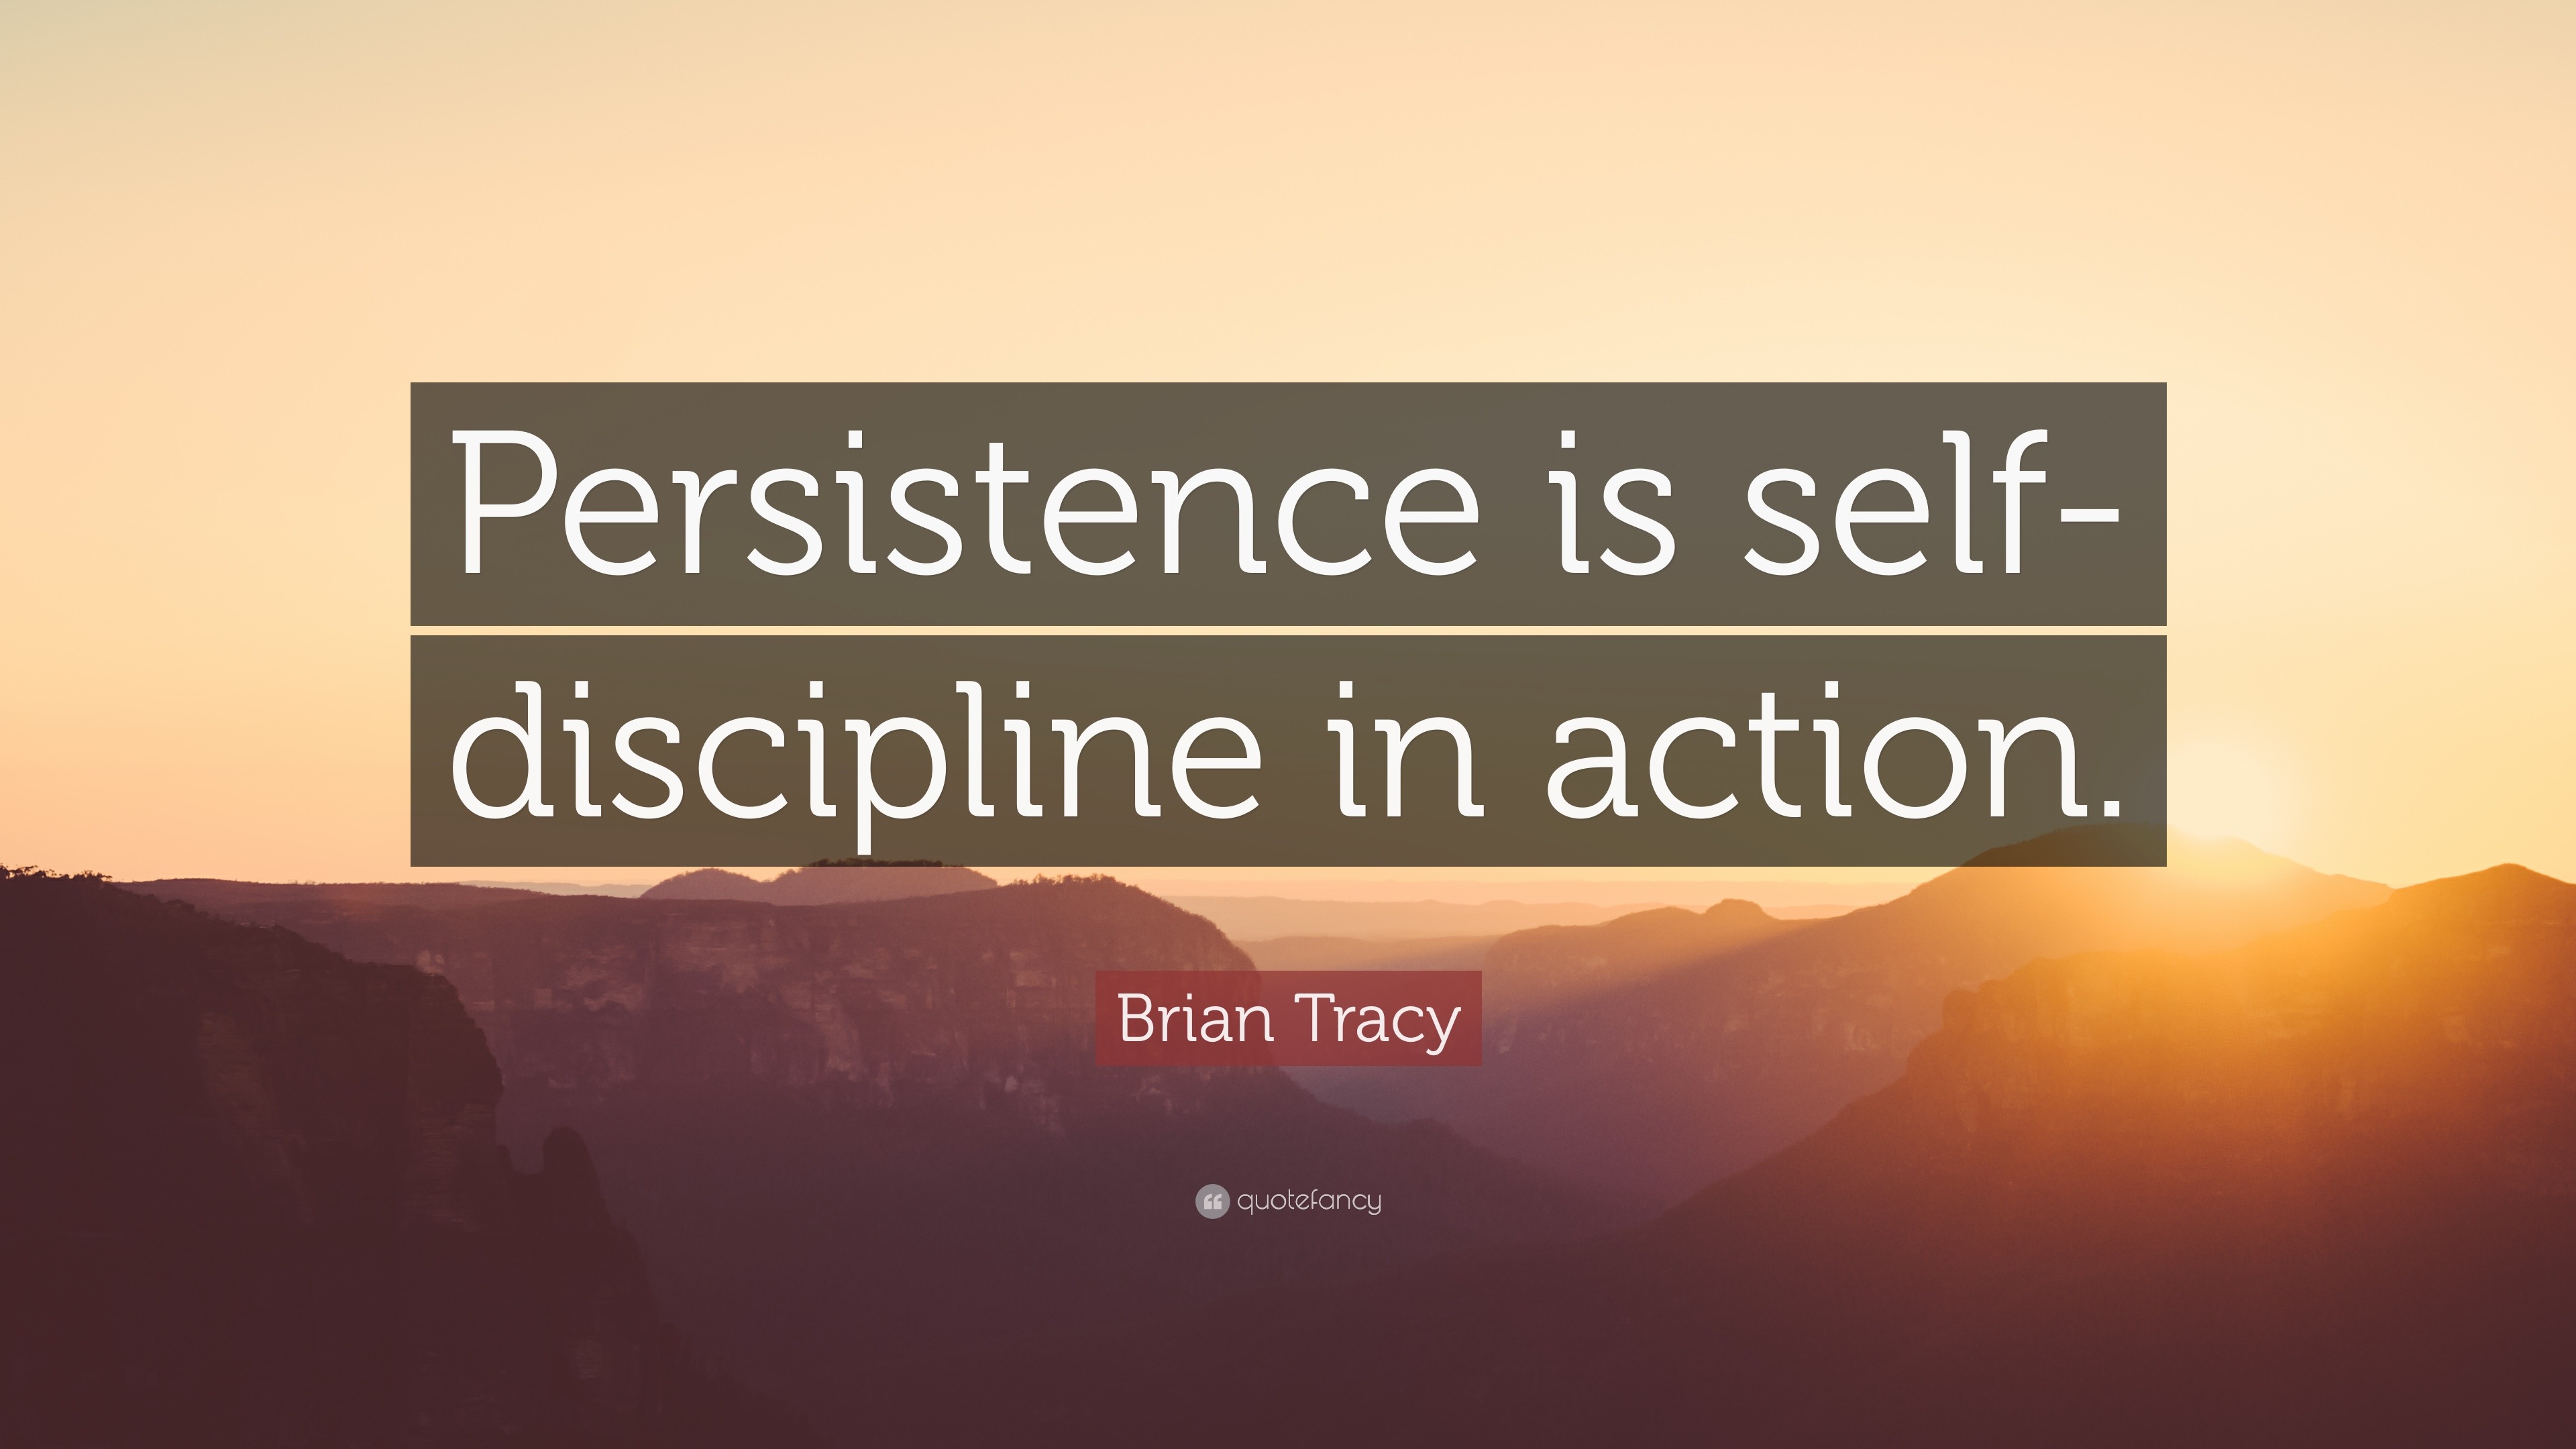 Persistence Quotes (50 wallpapers) - Quotefancy